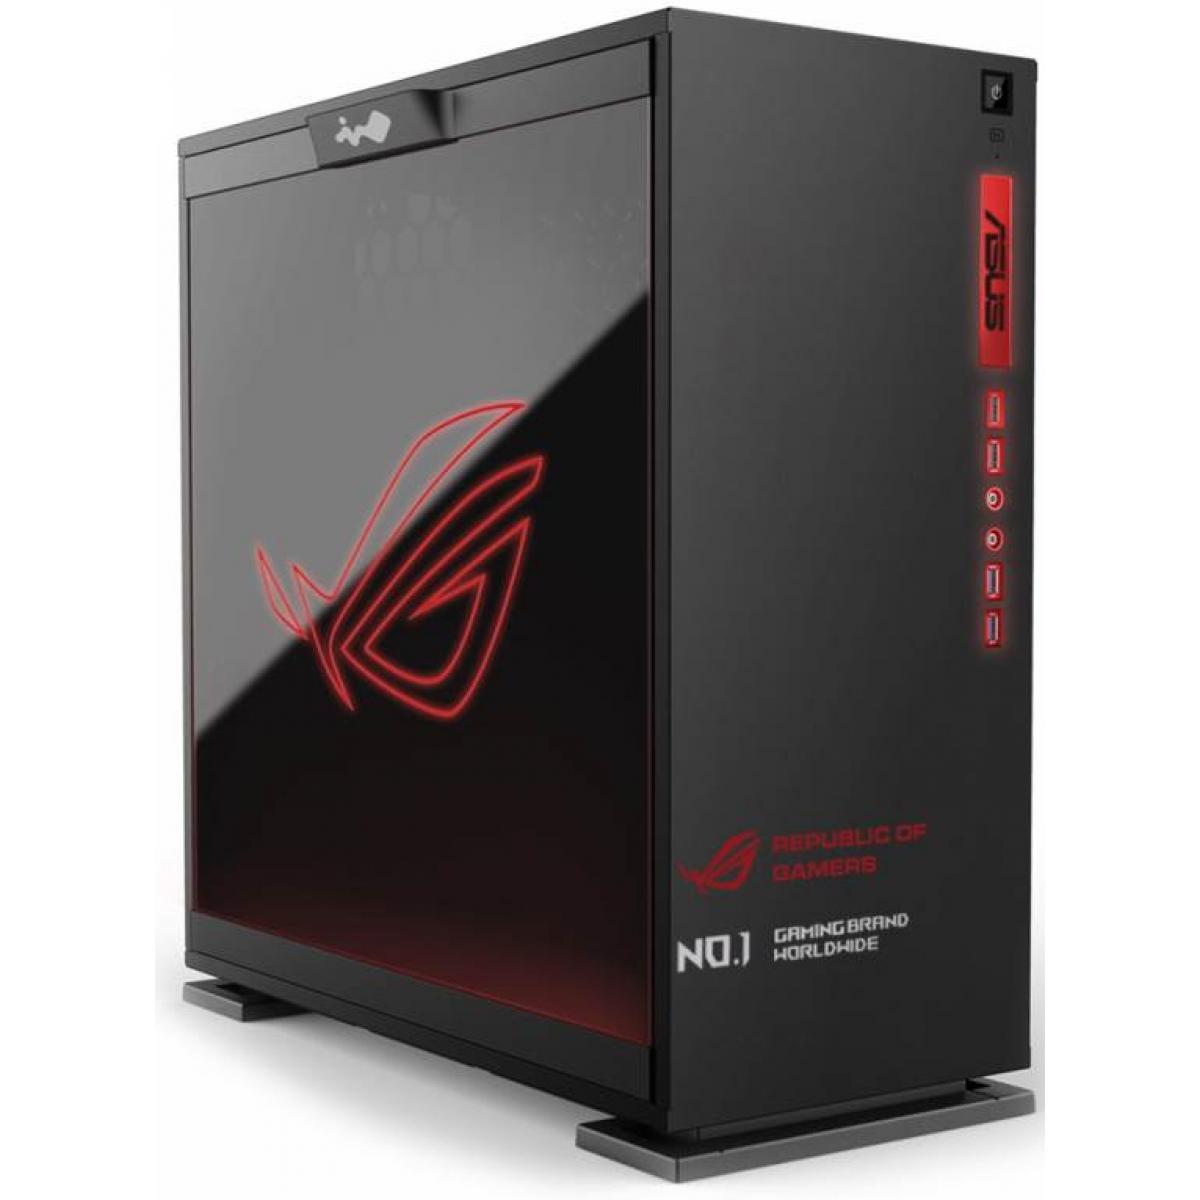 InWin 303 ASUS ROG Limited Edition Mid Tower Case | INWC-303-ASUS-RGB